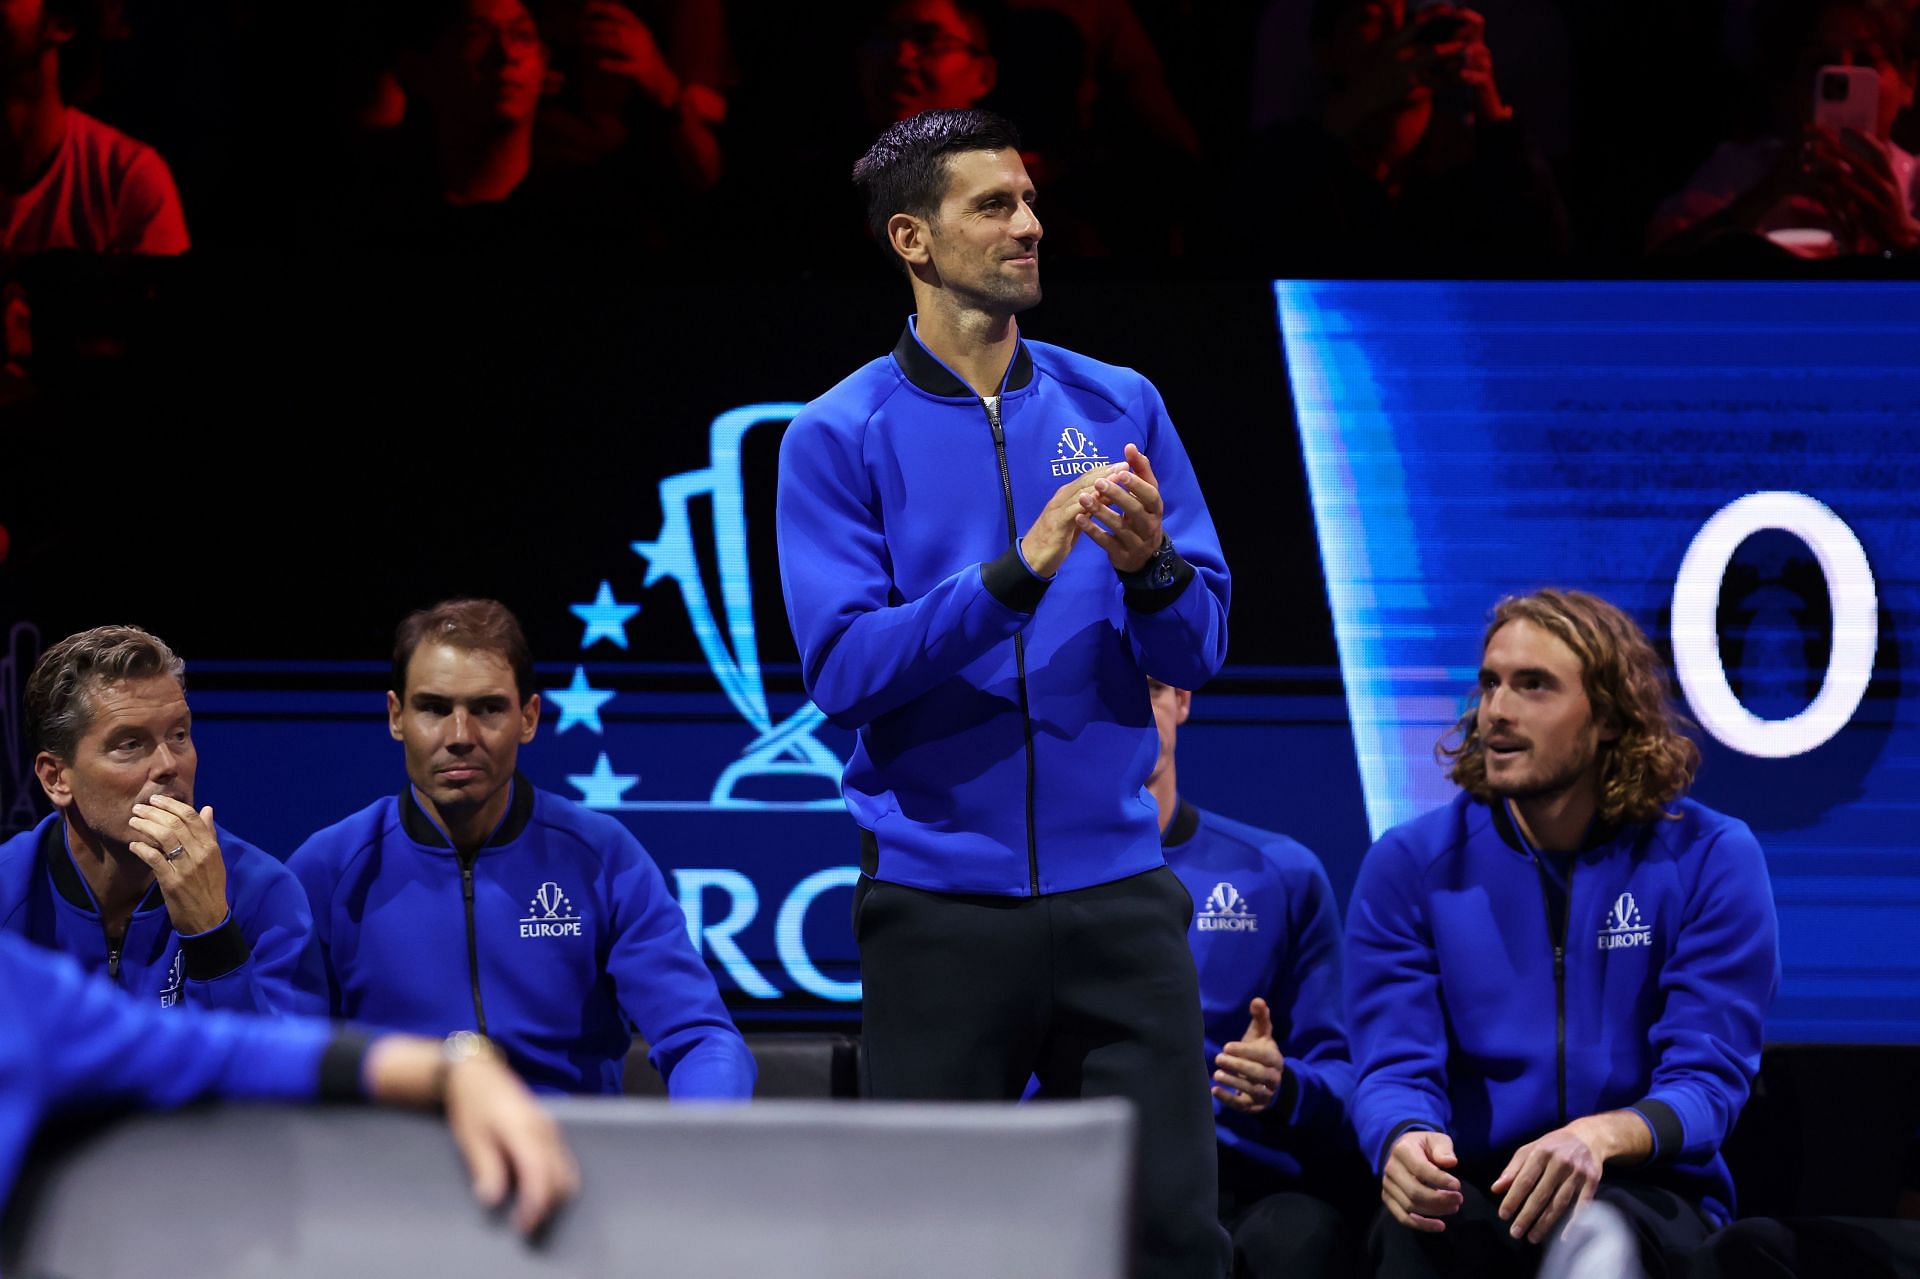 Laver Cup 2022 Schedule Today TV schedule, start time, order of play